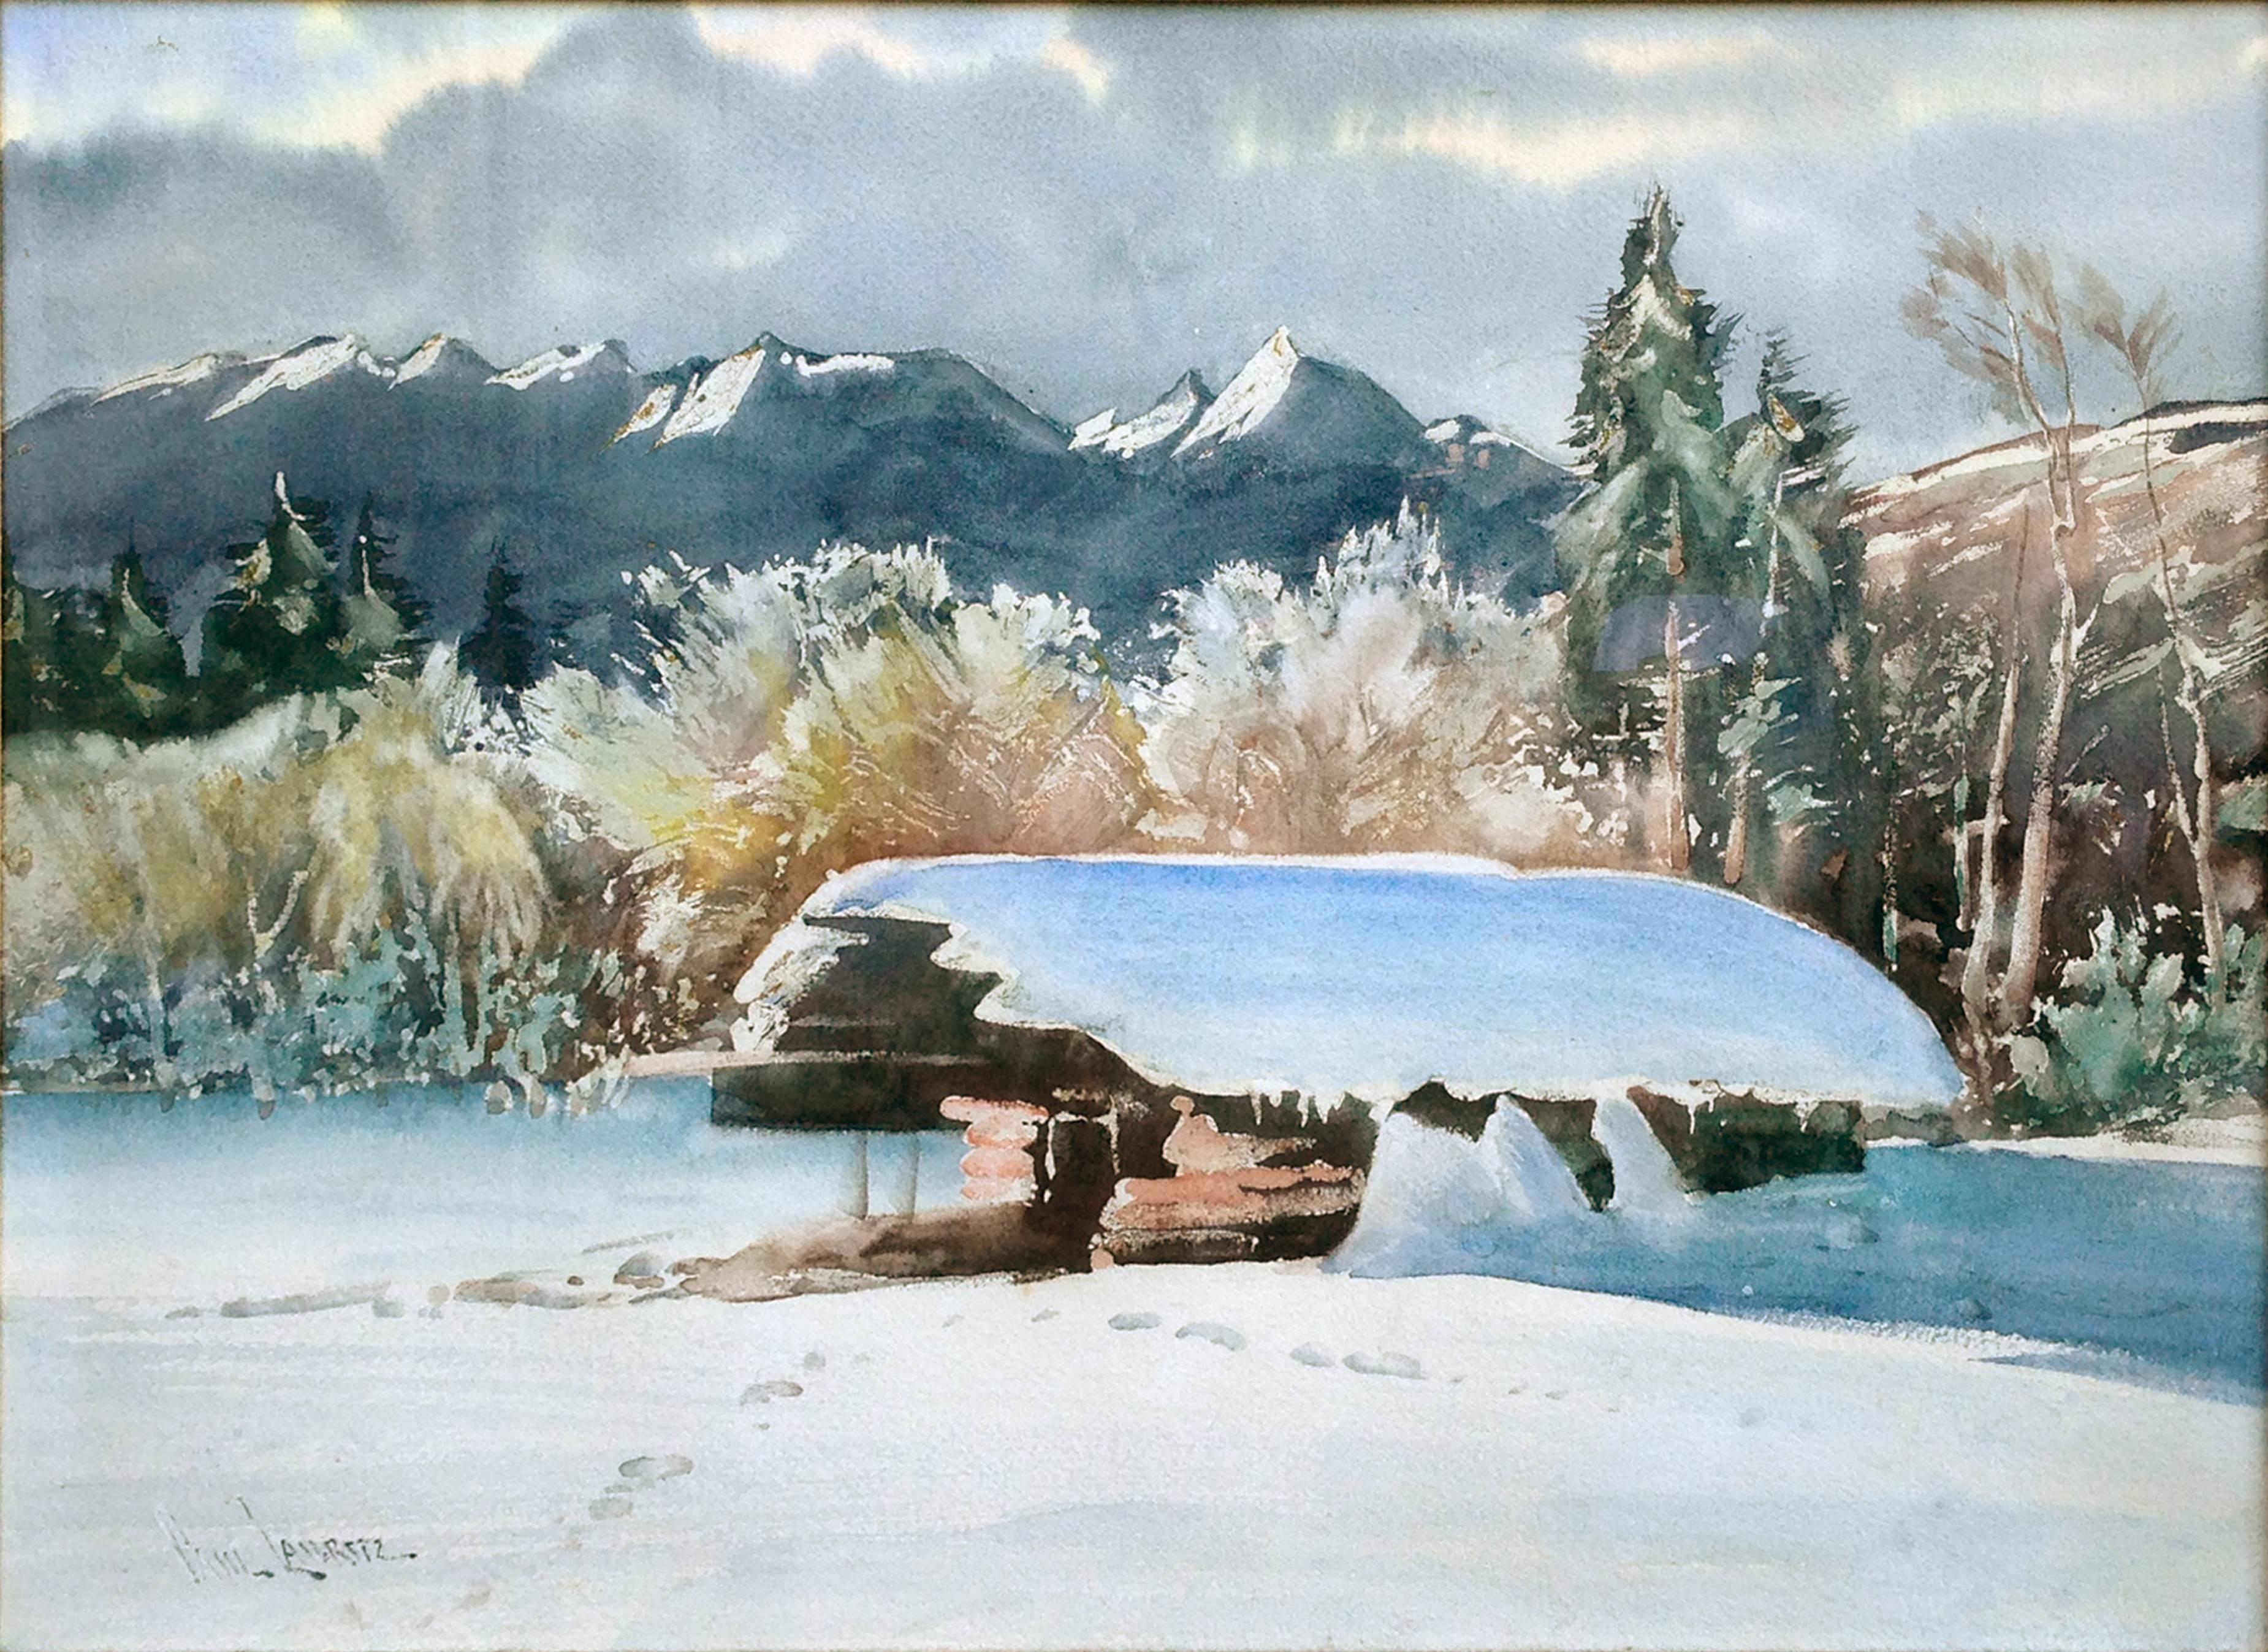 Early 20th Century Yosemite Tuolumne Meadows Winter Landscape  - Painting by Paul Lauritz